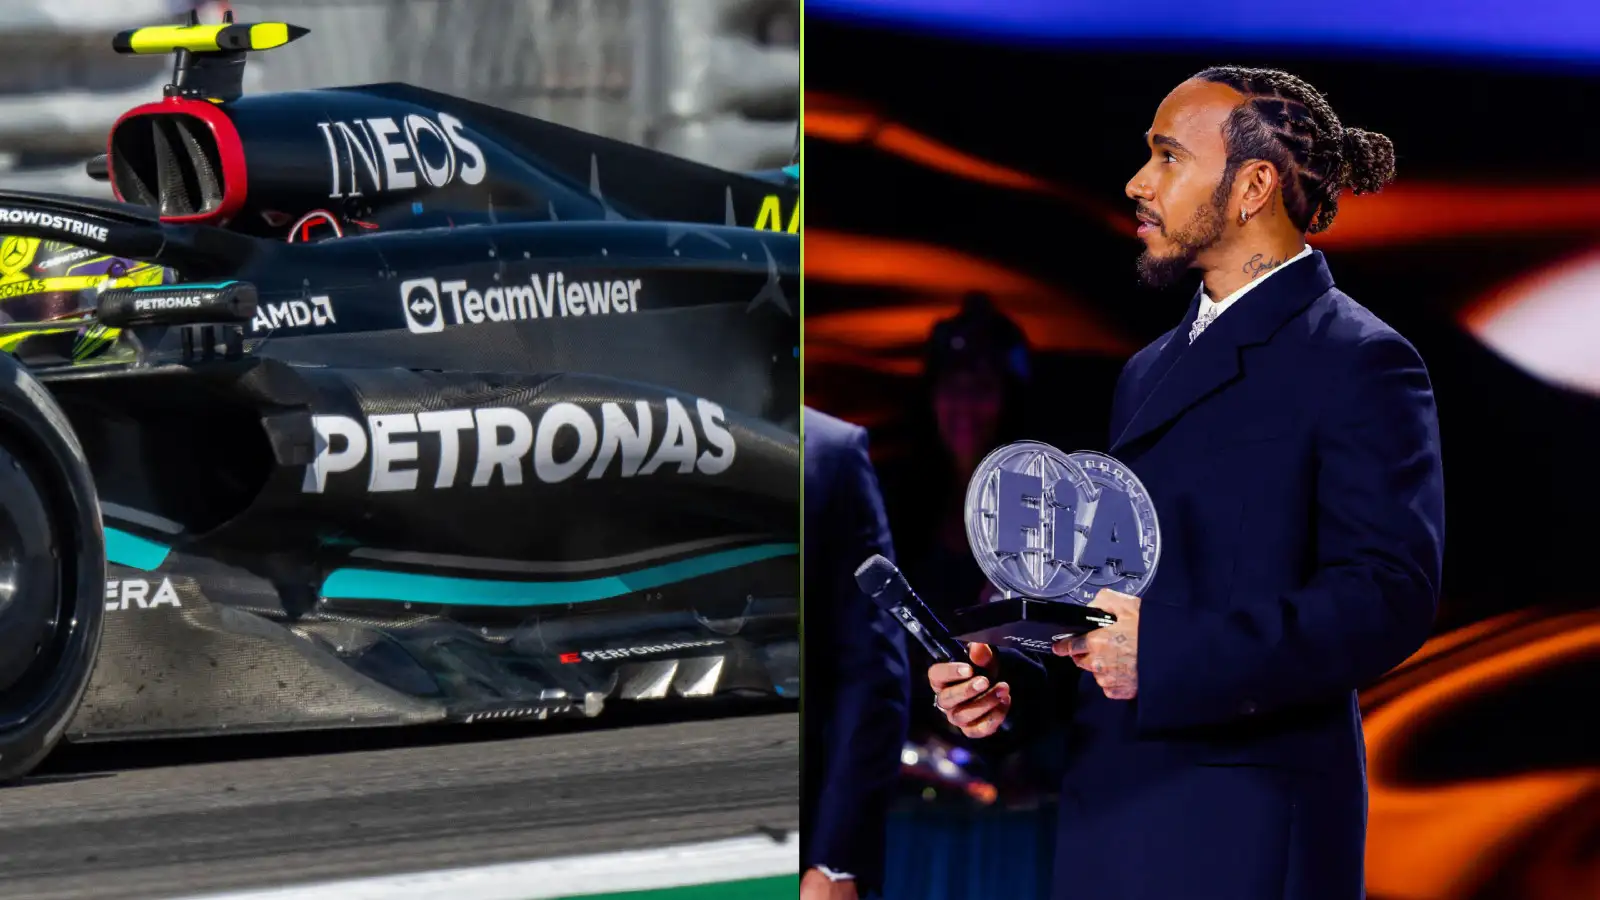 Mercedes' sidepods and Lewis Hamilton's FIA trophy made the headlines in Sunday's F1 news round-up.